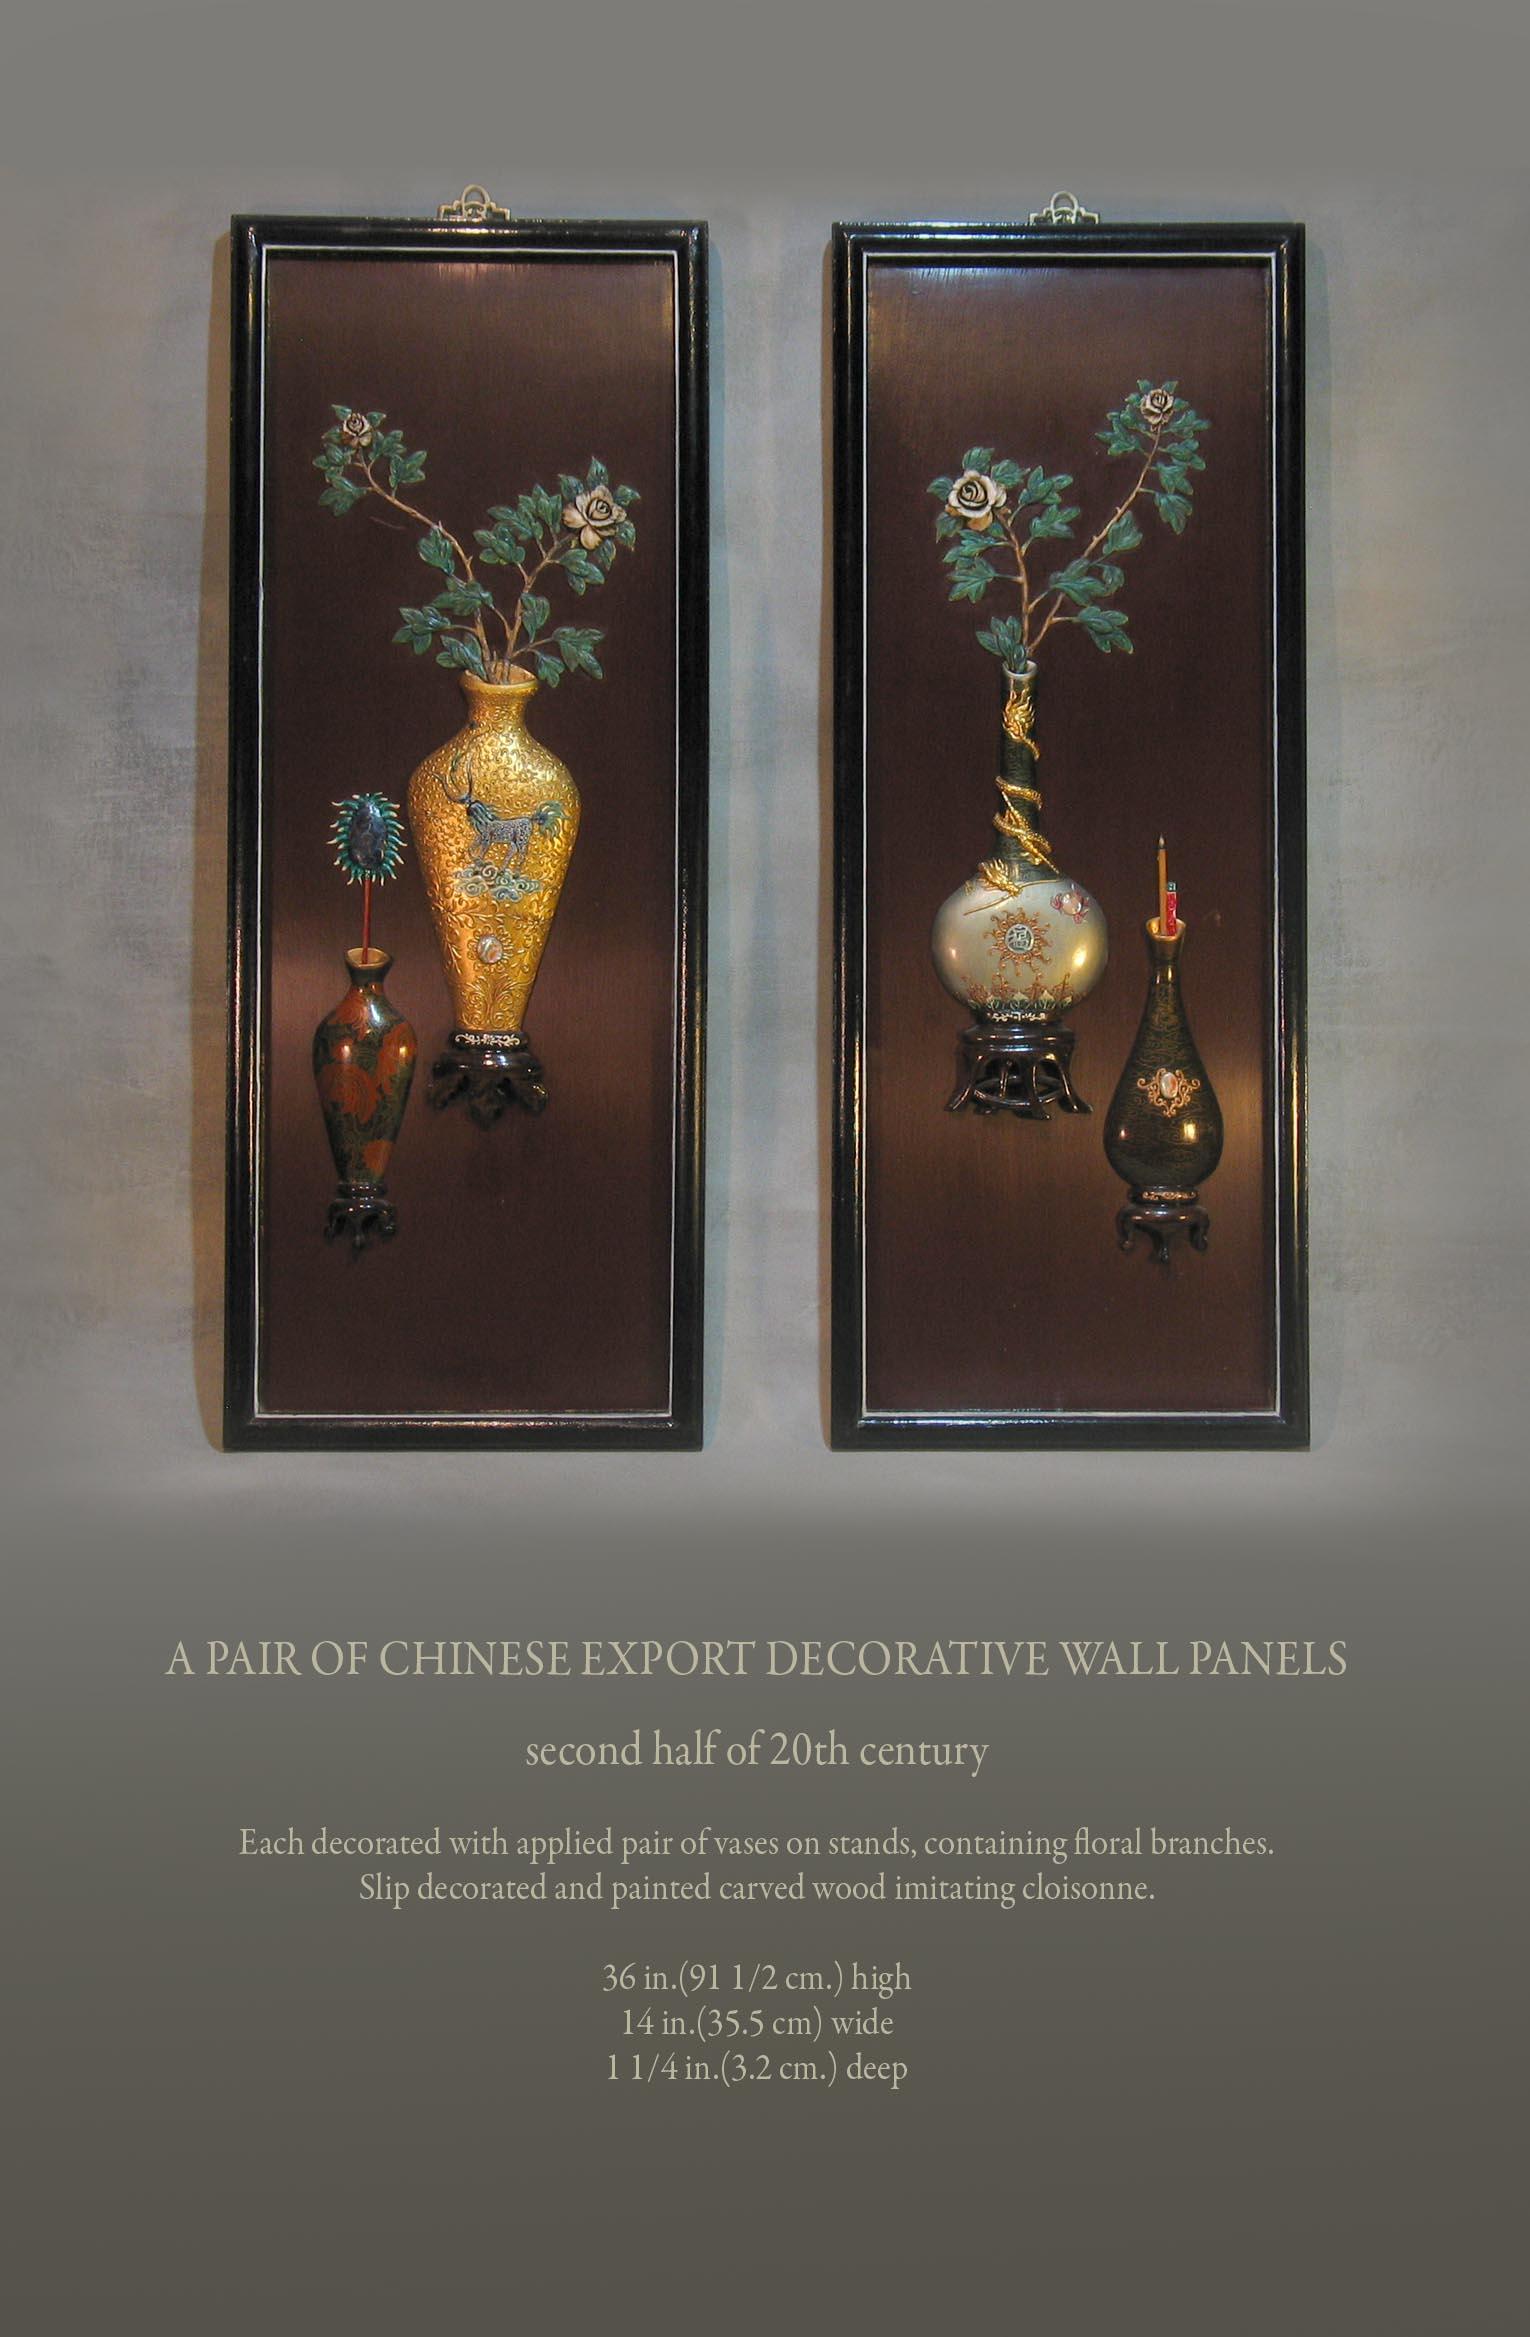 A pair of Chinese export decorative wall panels,

Mid-second half of 20th century.

Each decorated with applied pair of vases on stands, containing floral branches.
Slip decorated and painted carved wood imitating cloisonné.

Measures: 36 in.